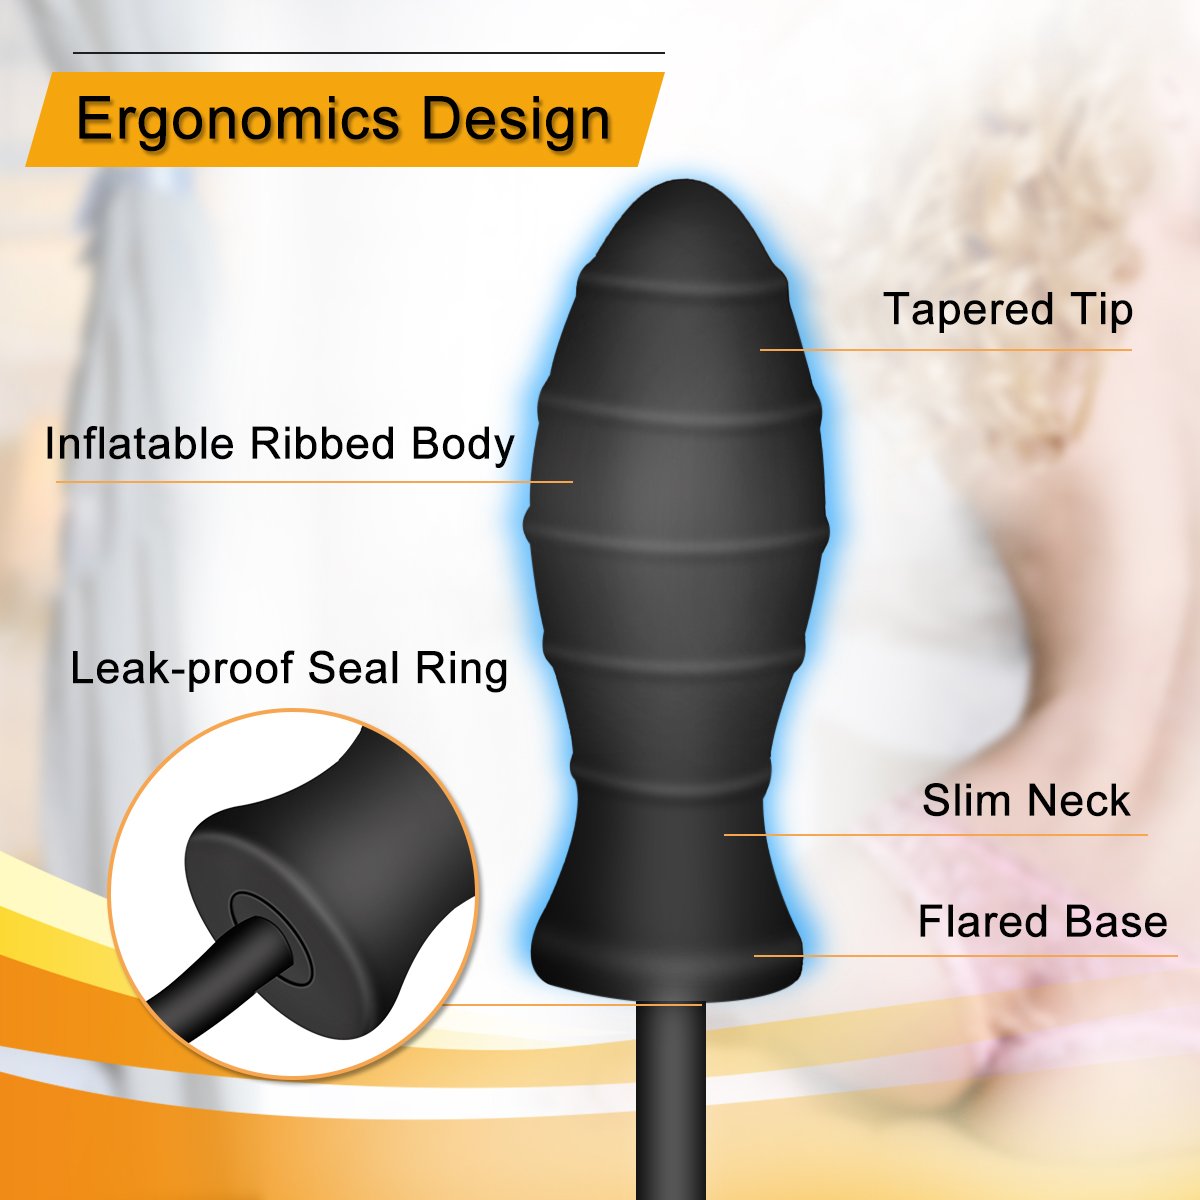 Inflatable Butt Plug Anal Balloon Pump with Quick Release Valve Stretch